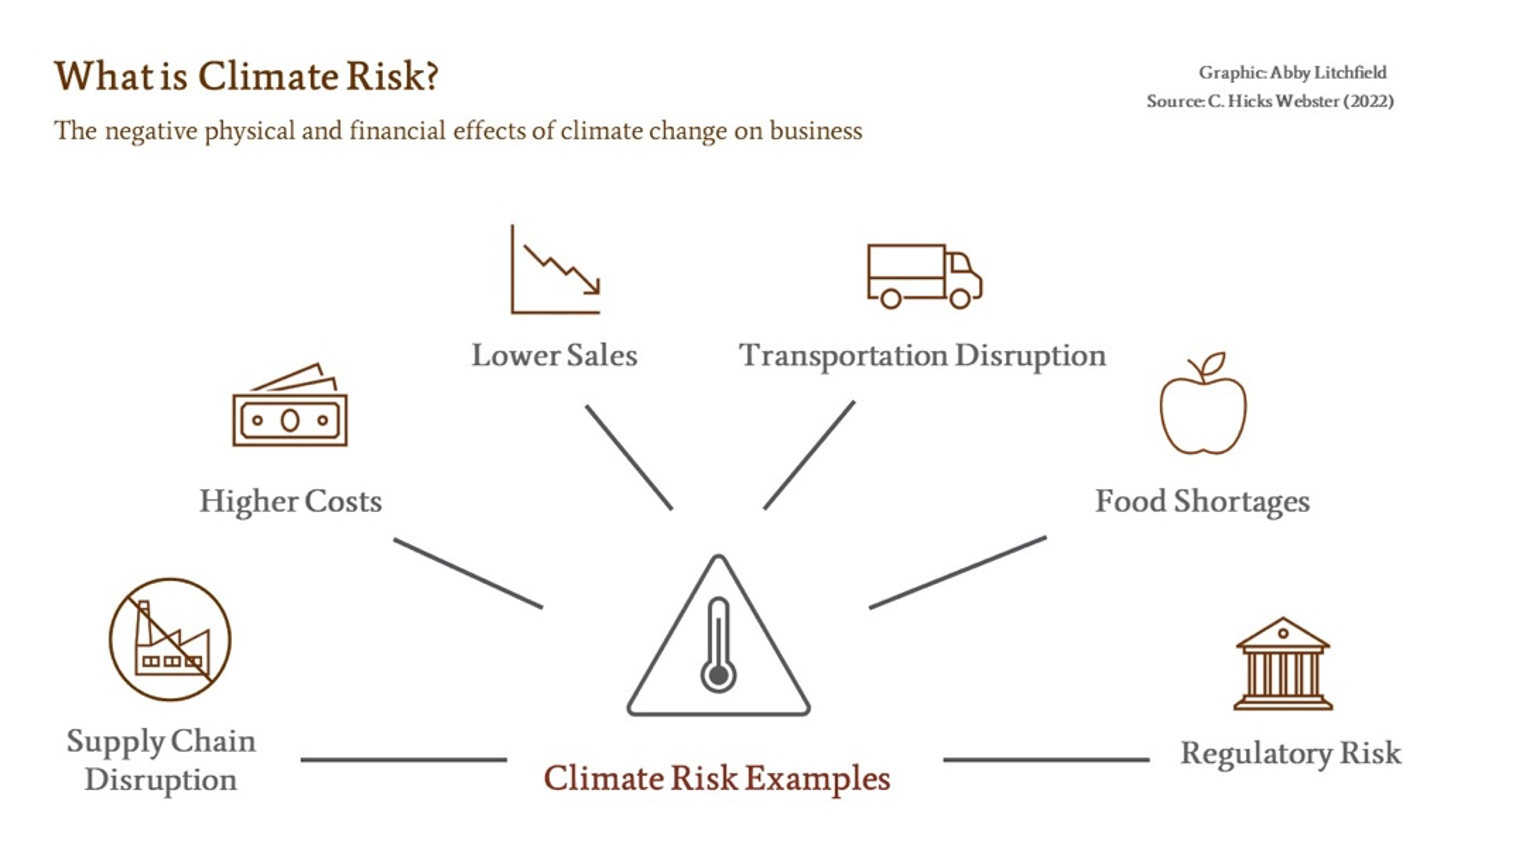 Graphic illustrating the factors that make up climate risk